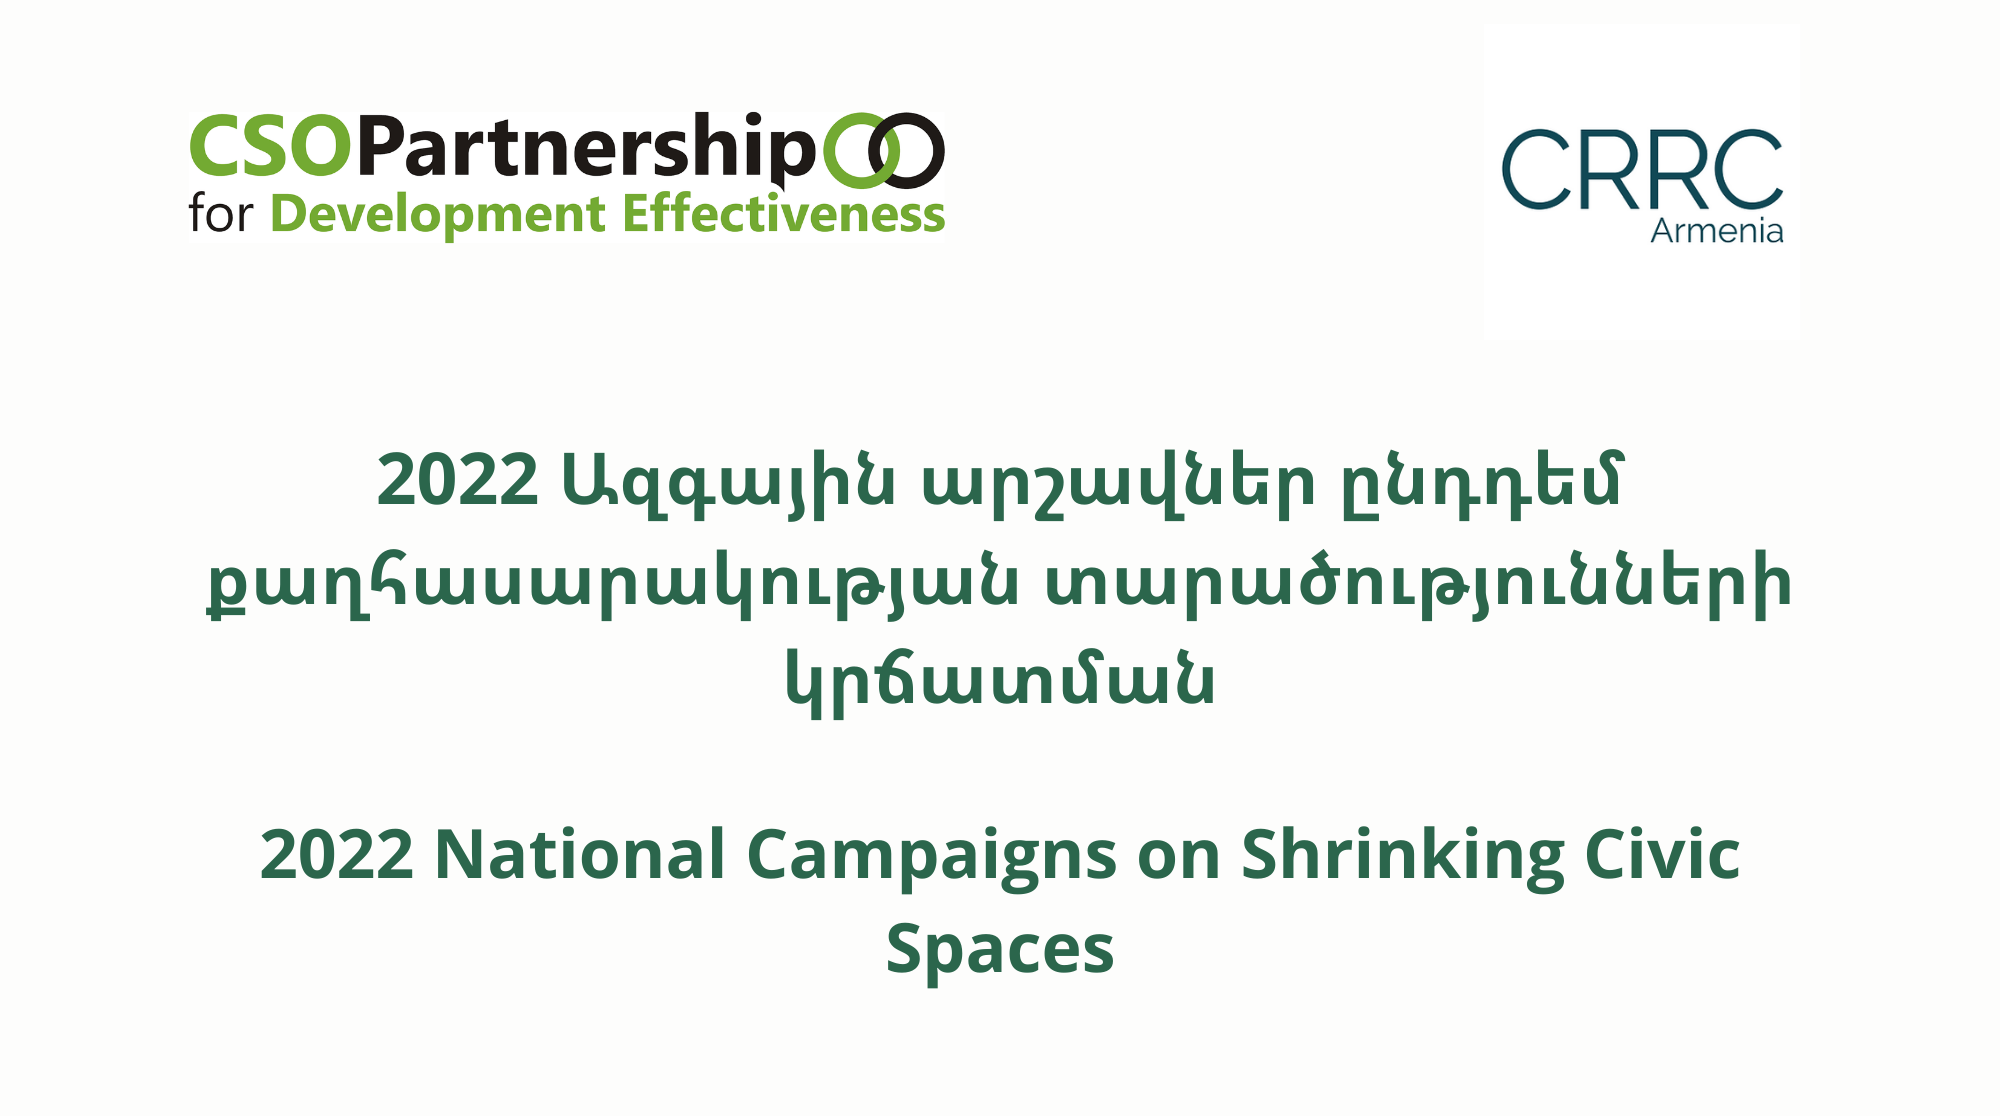 2022 National Campaigns on Shrinking Civic Spaces